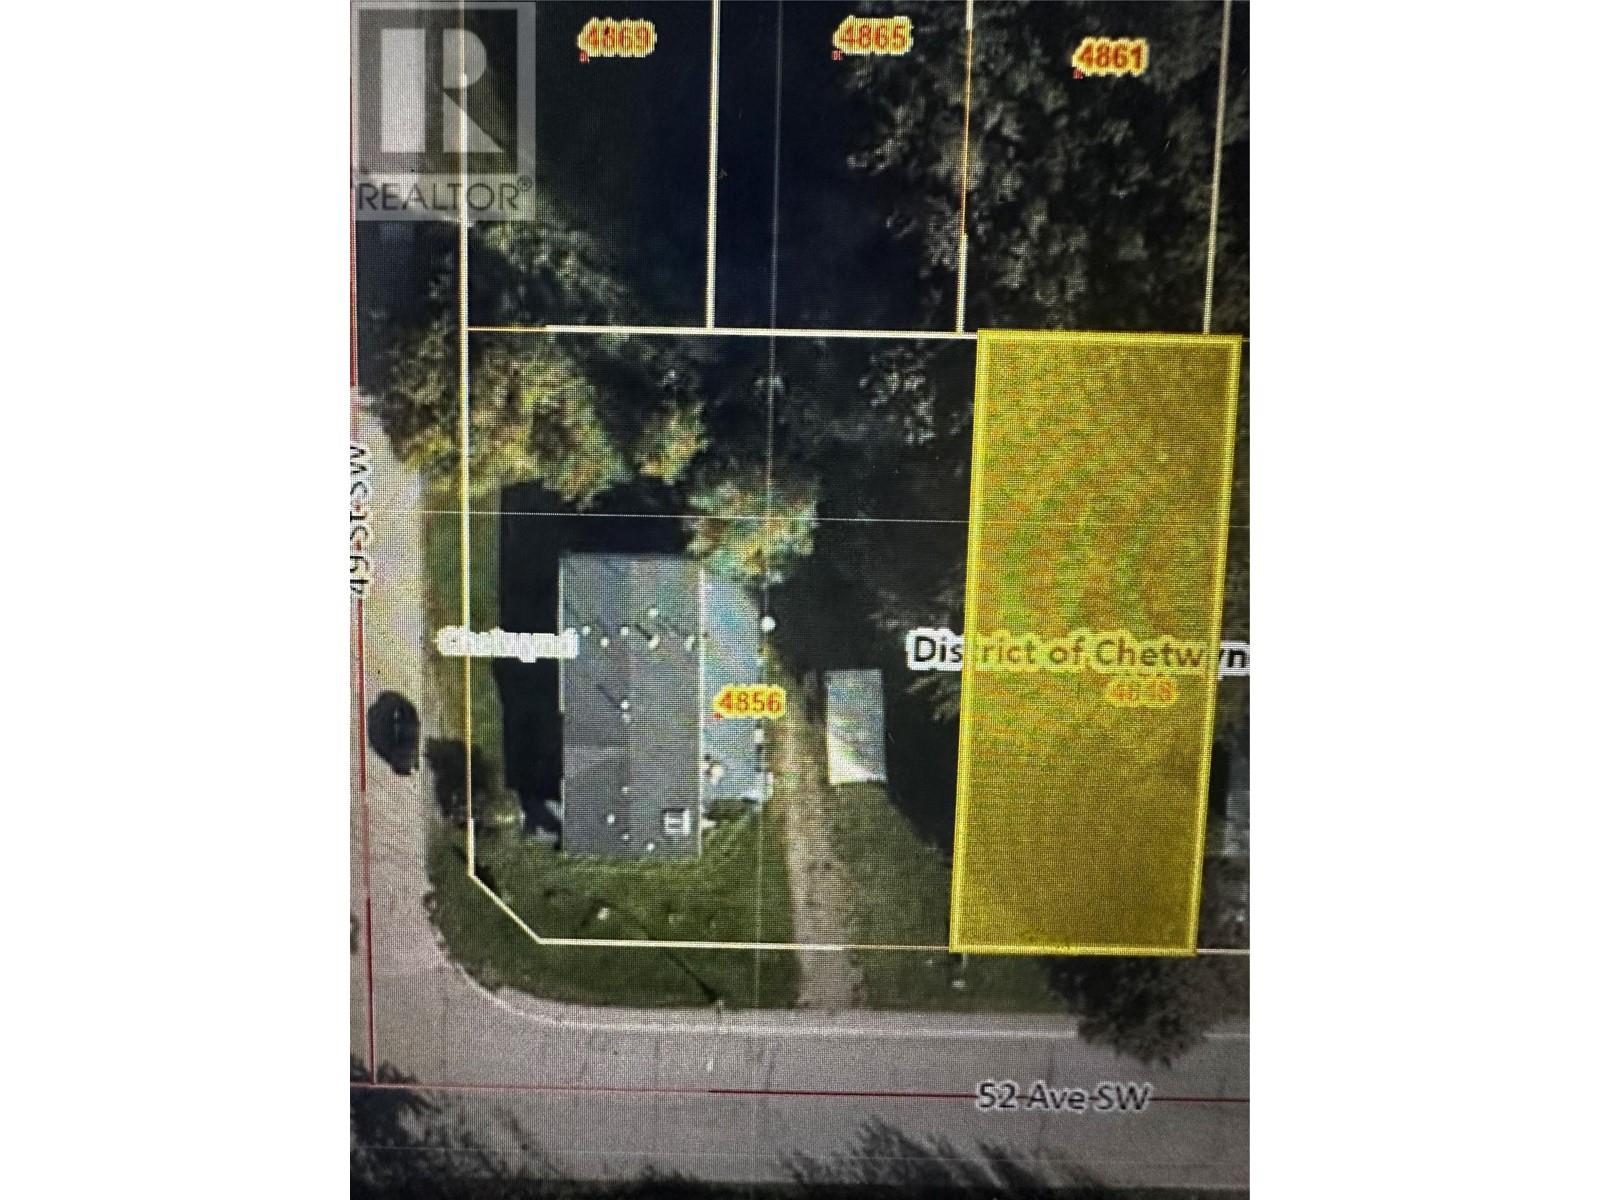 Vacant Land For Sale | 4848 52 Avenue Sw | Chetwynd | V0C1J0